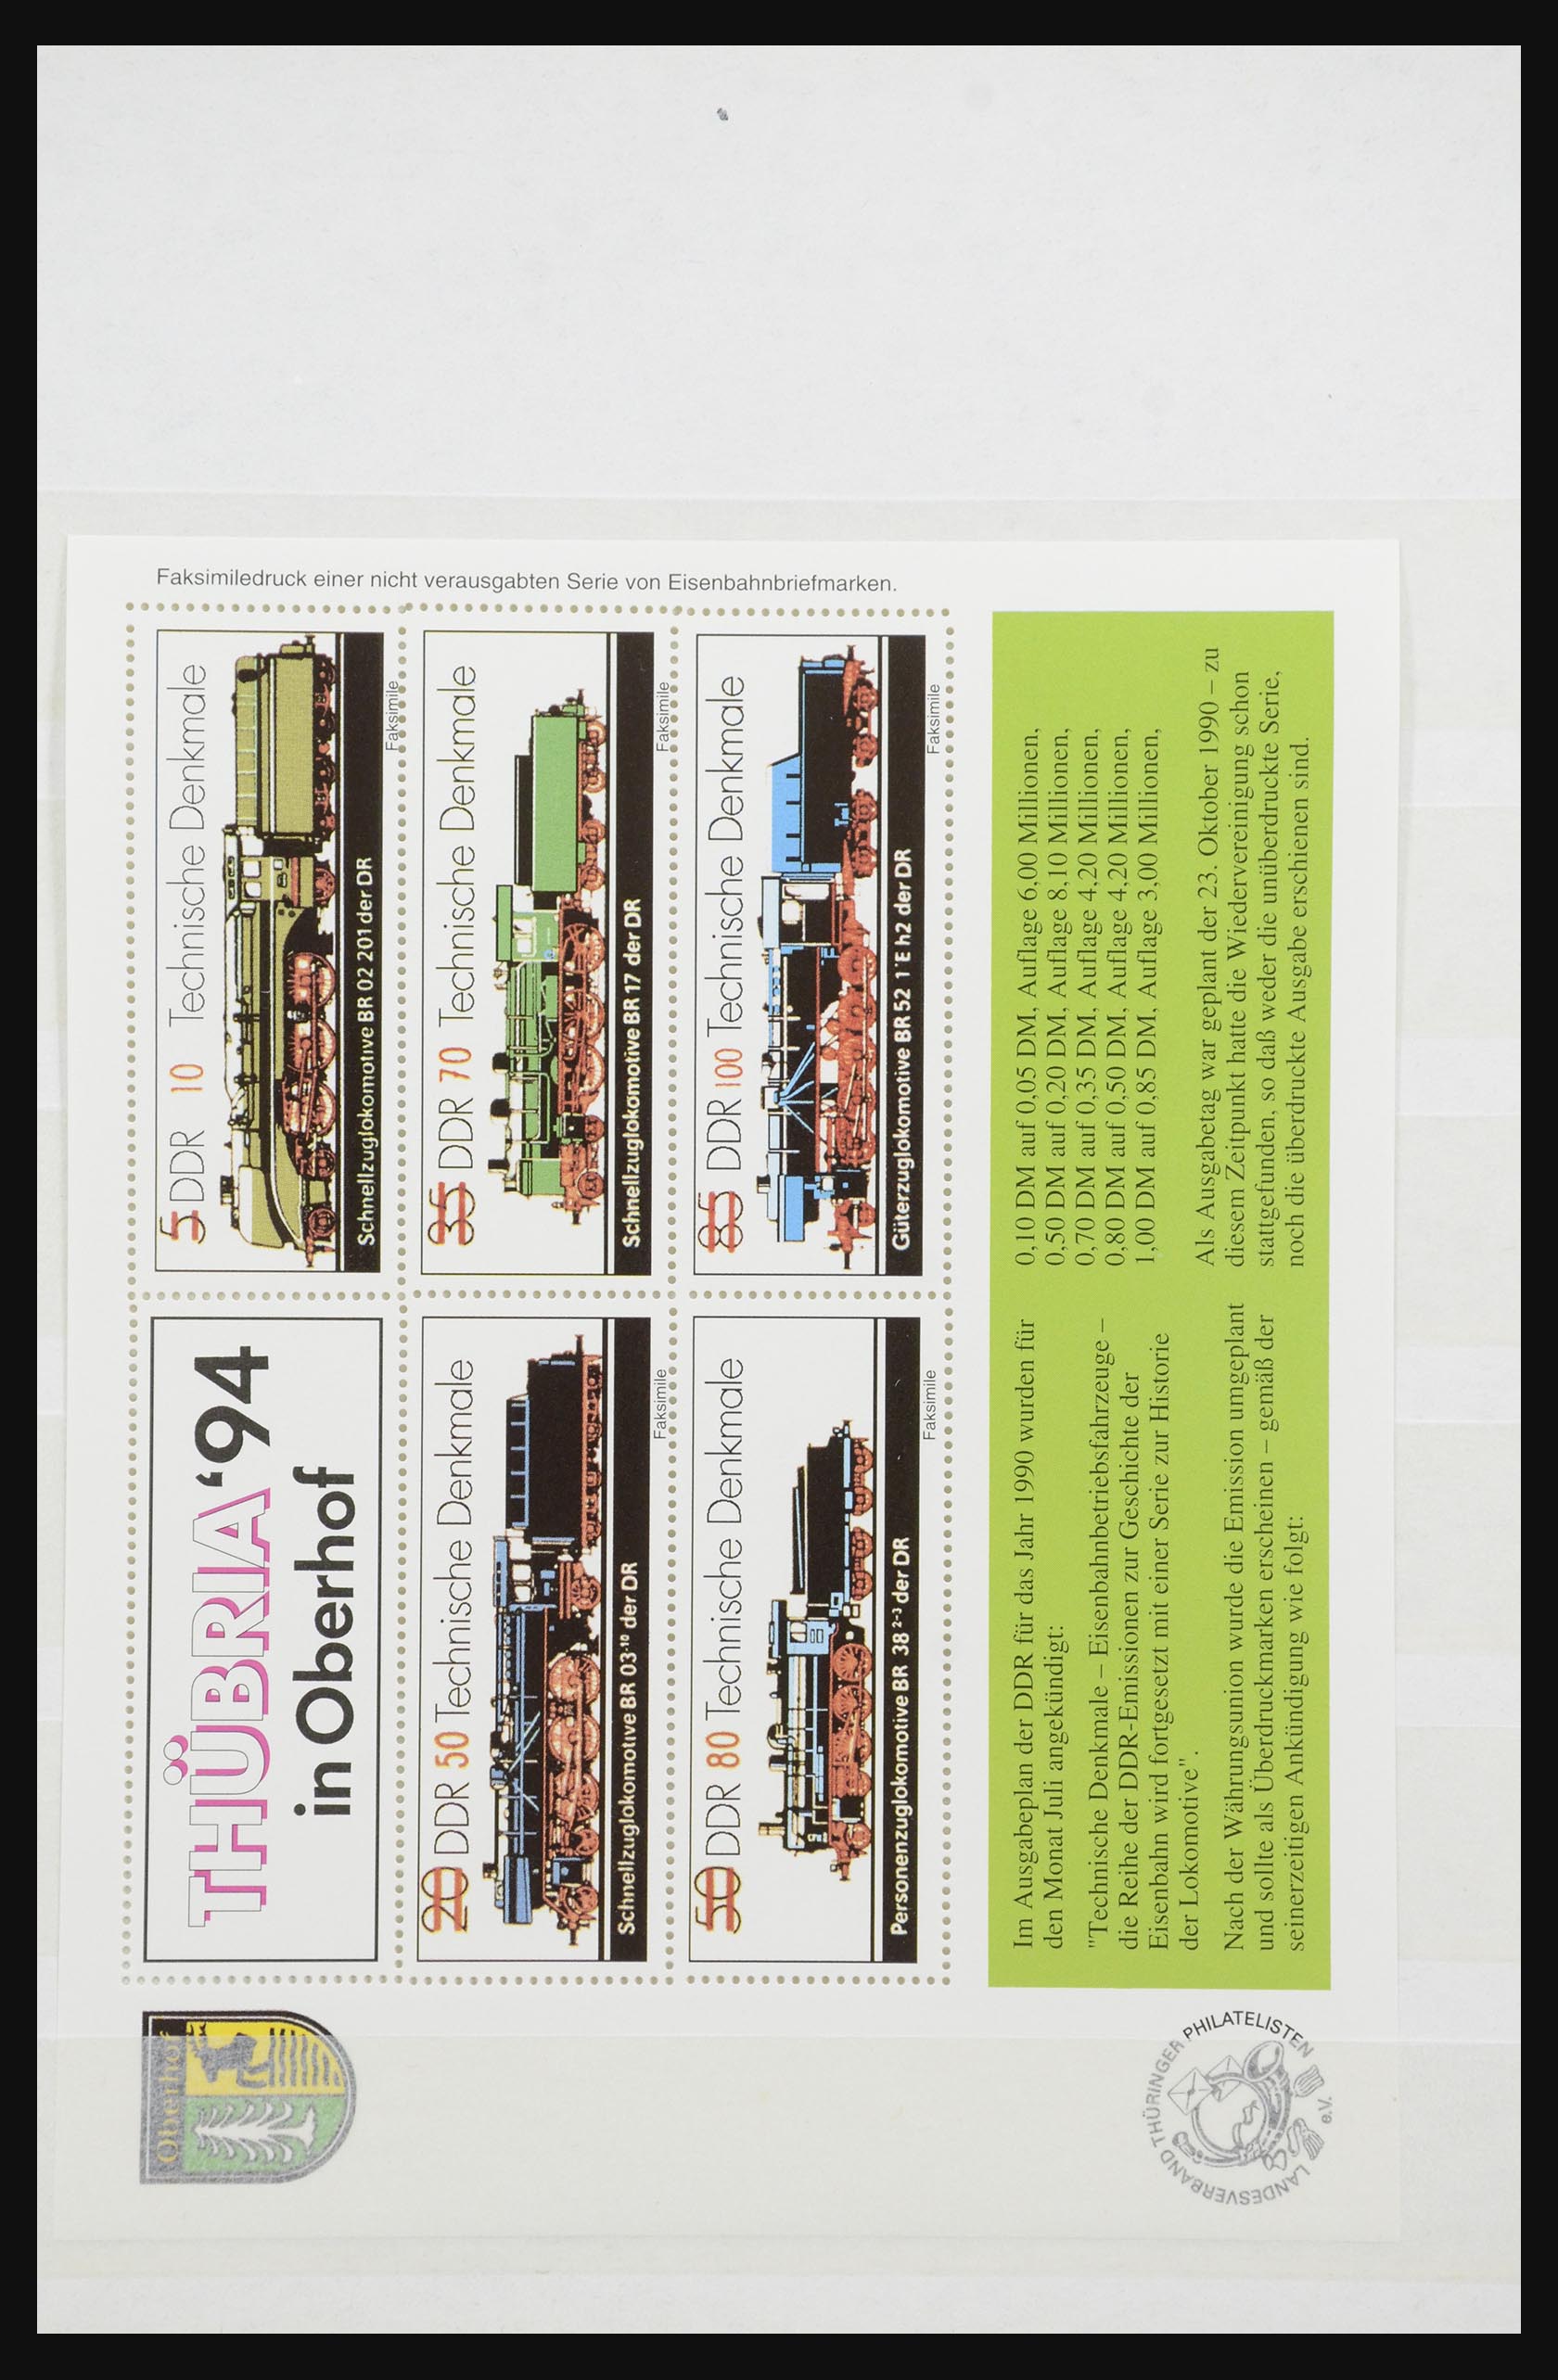 32050 037 - 32050 Bundespost special sheets 1980-2010.